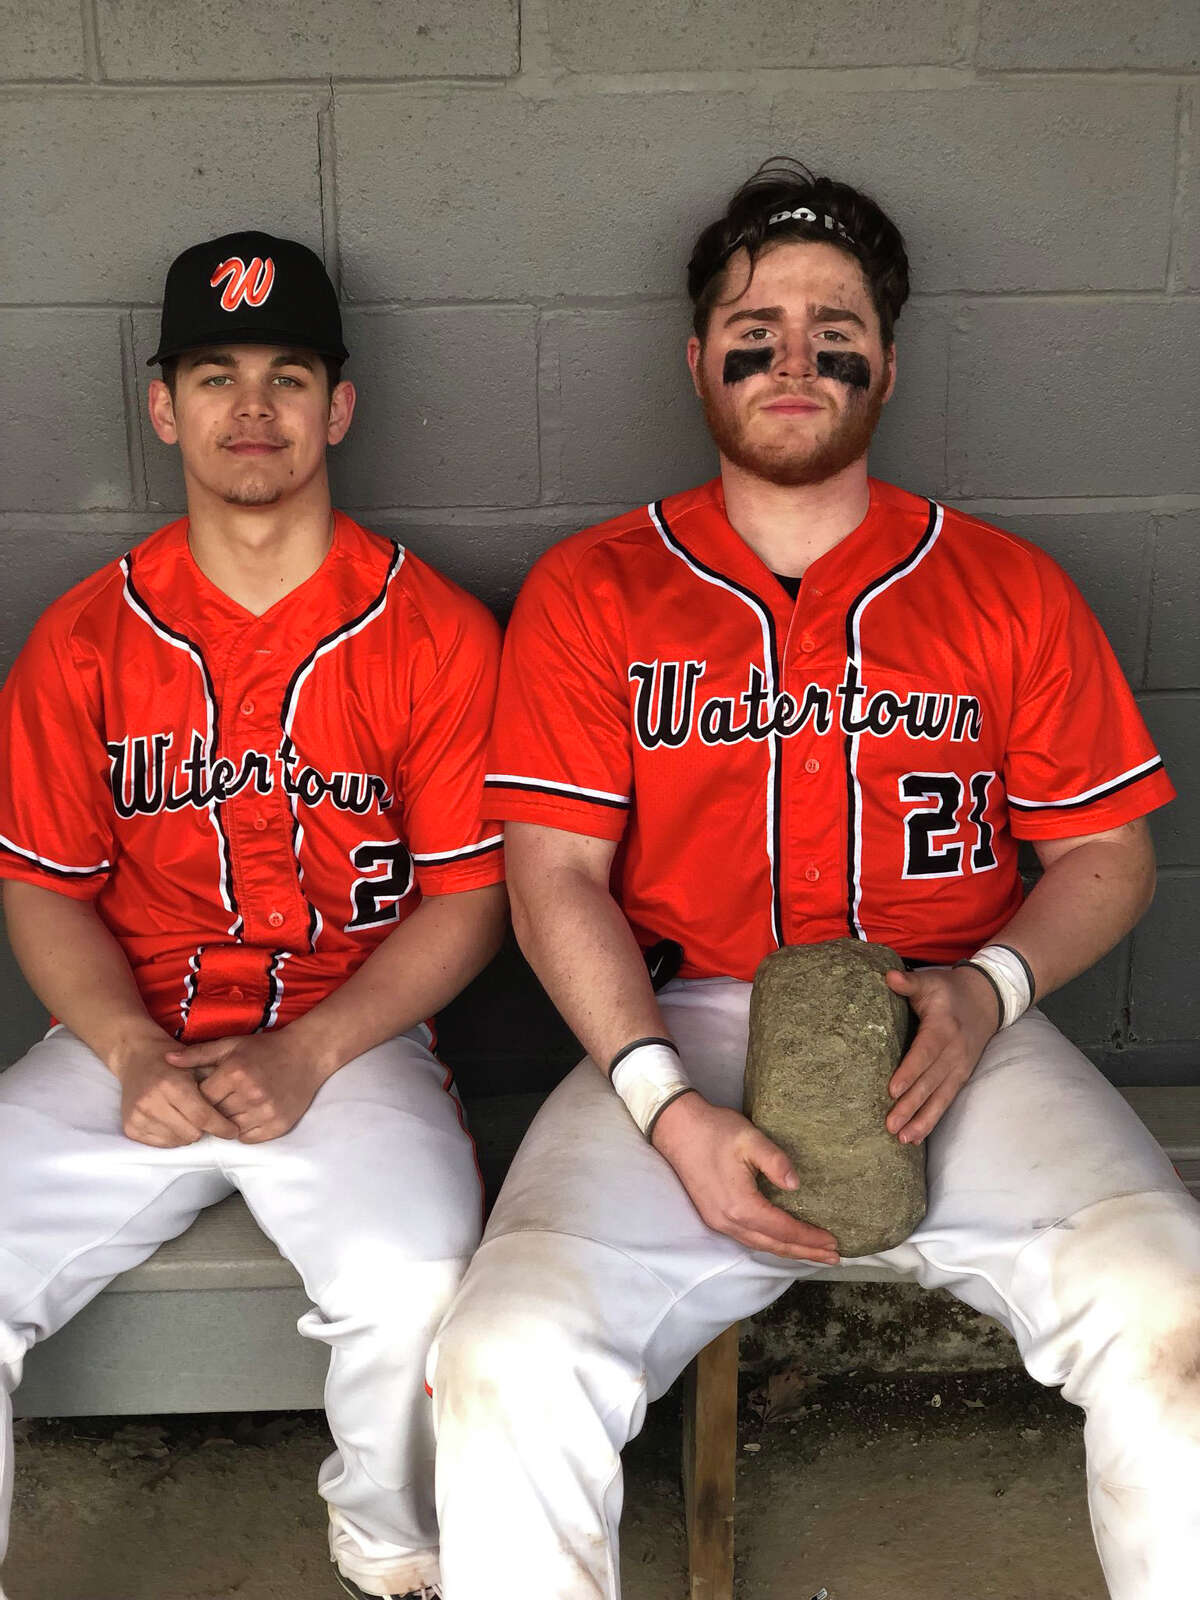 Watertown’s Stevie Phillips, left, and Andrew Teardo were both awarded the rock after the team’s win over Pomperaug. (Photo courtesy of @WatertownHSBase on Twitter)